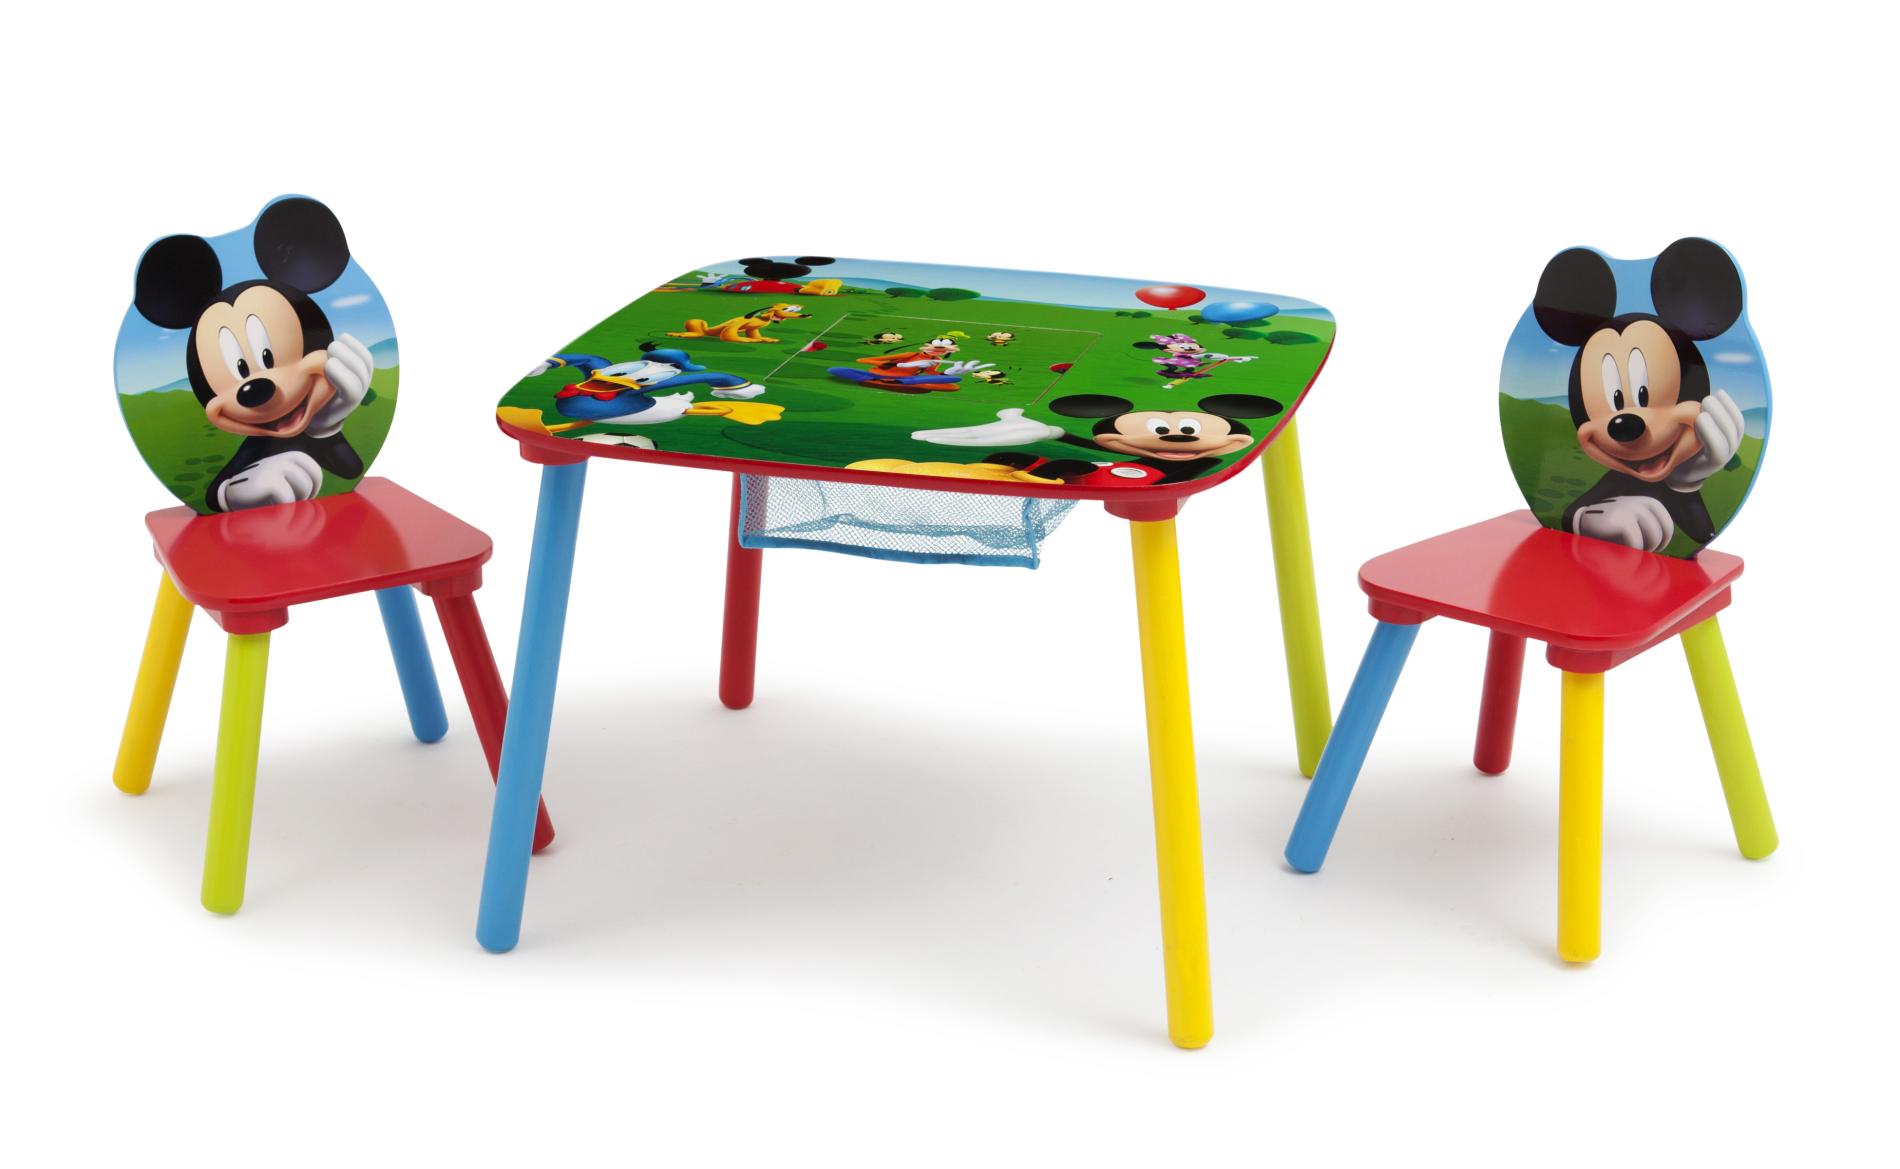 kids chair and table kmart